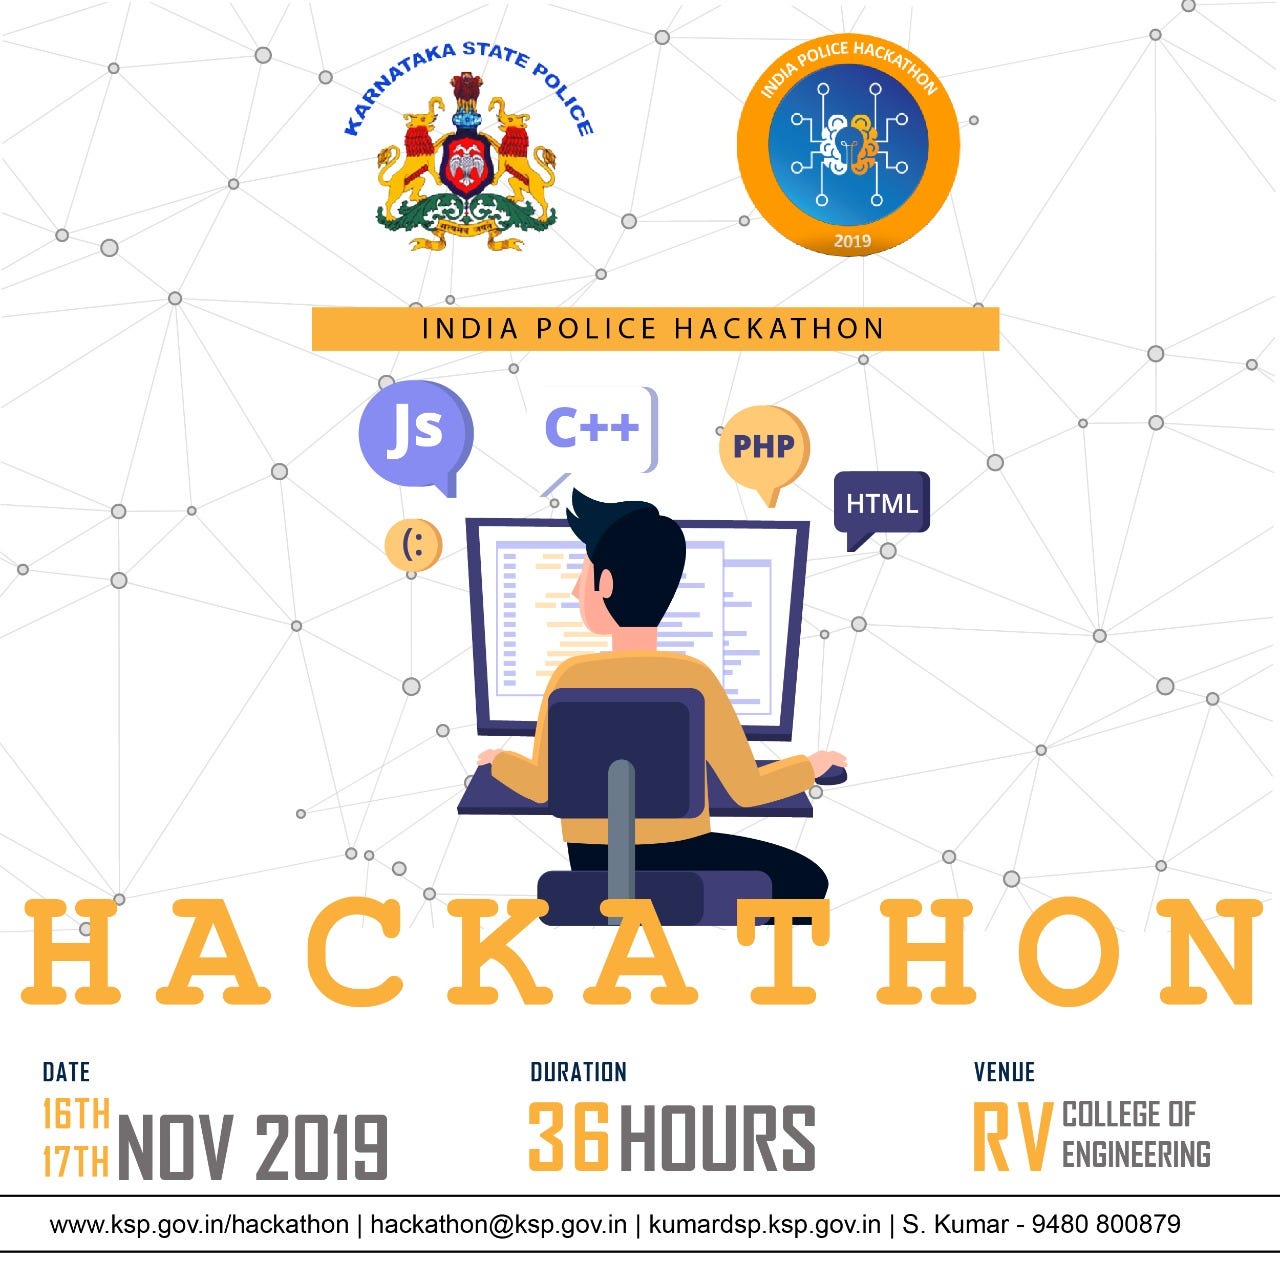 India Police Hackathon 2019. How often does one get a chance to… | by Purva  Huilgol | Analytics Vidhya | Medium